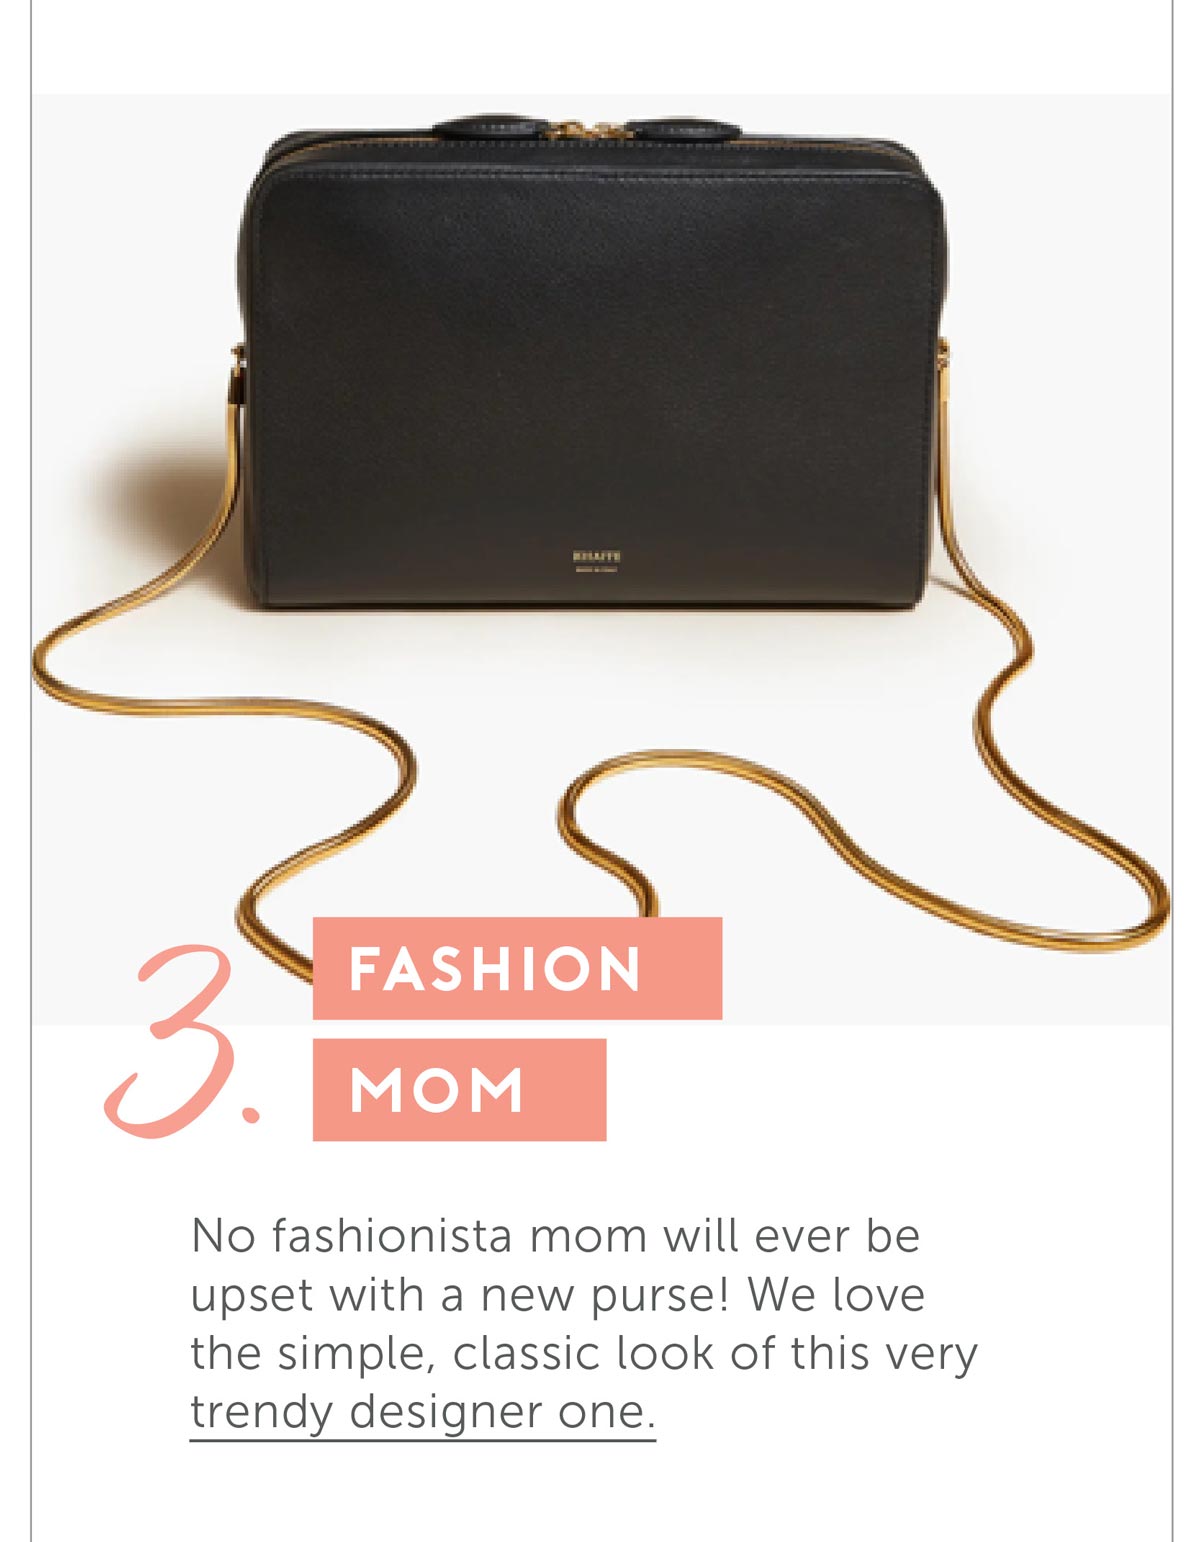 3. The Fashion Mom. No fashionista mom will ever be upset with a new purse! We love the simple, classic look of this very trendy designer one.